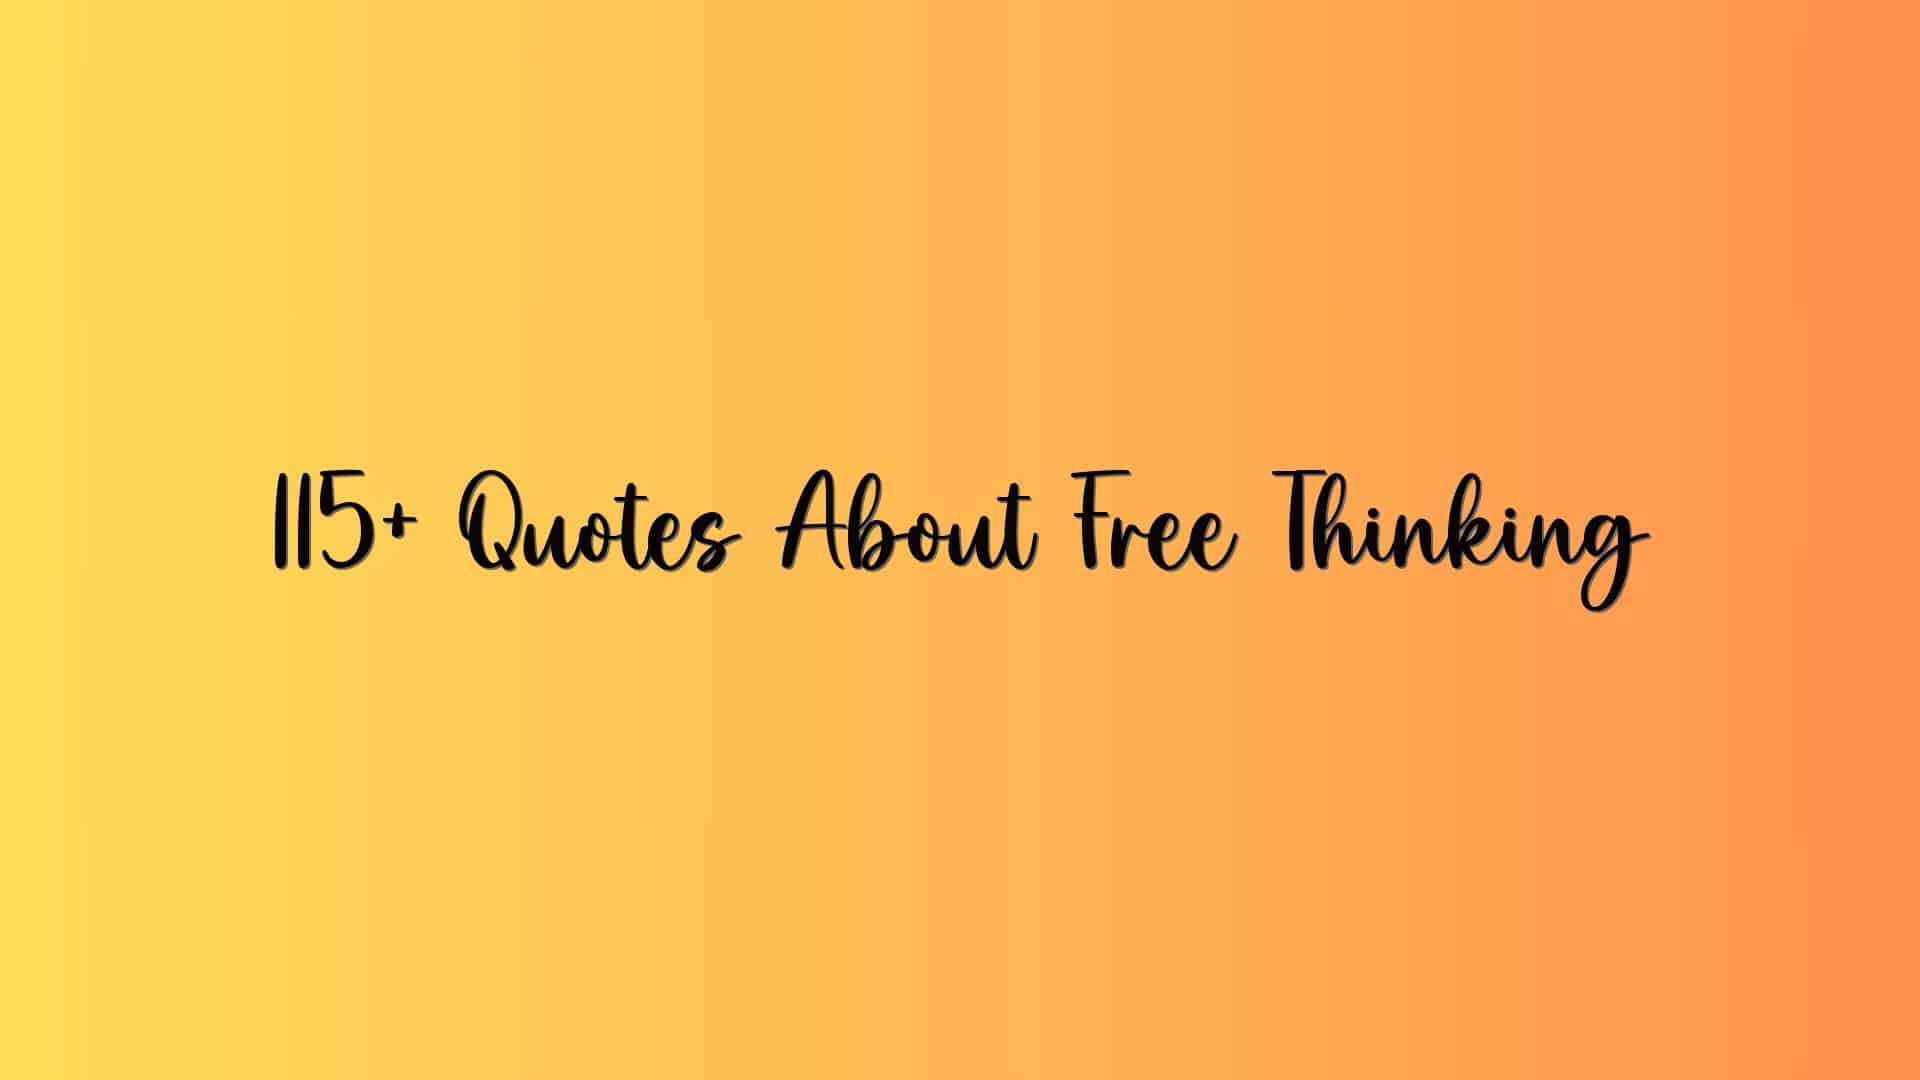 115+ Quotes About Free Thinking